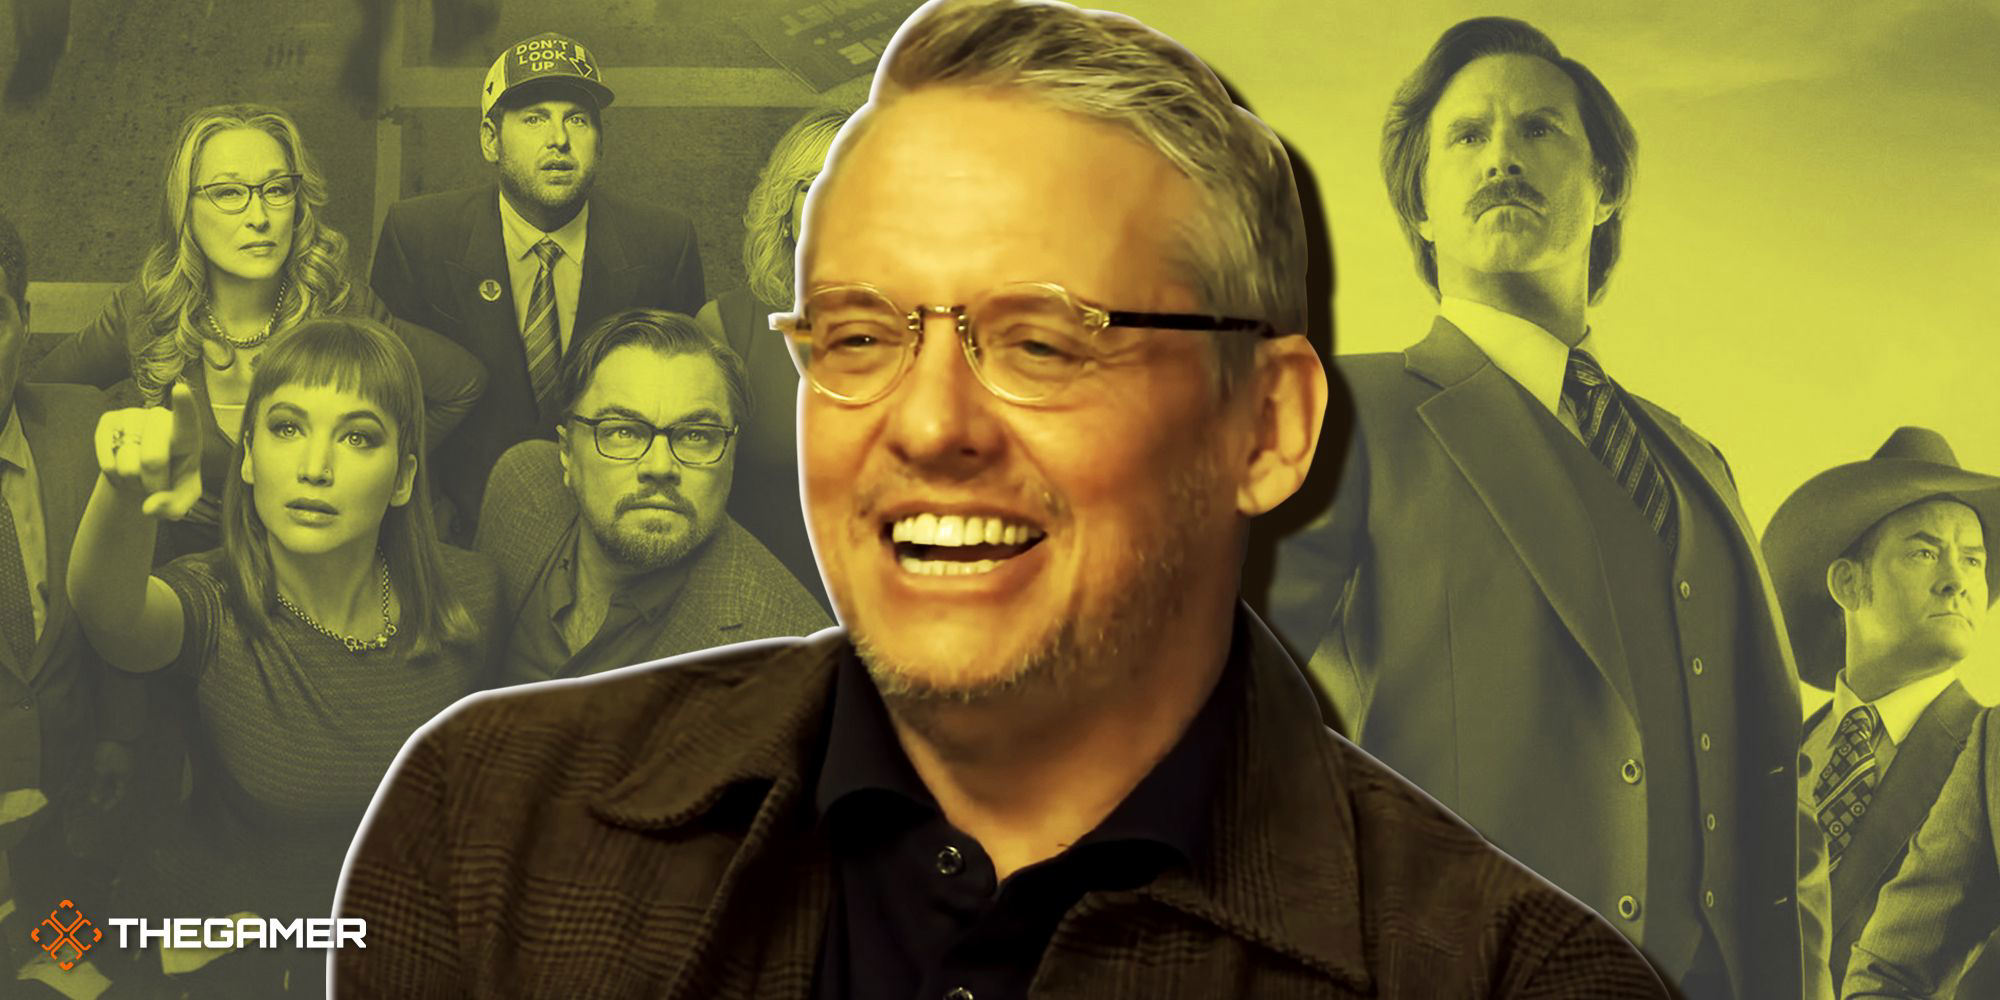 Adam Mckay Should Get Back To Making Comedy Movies